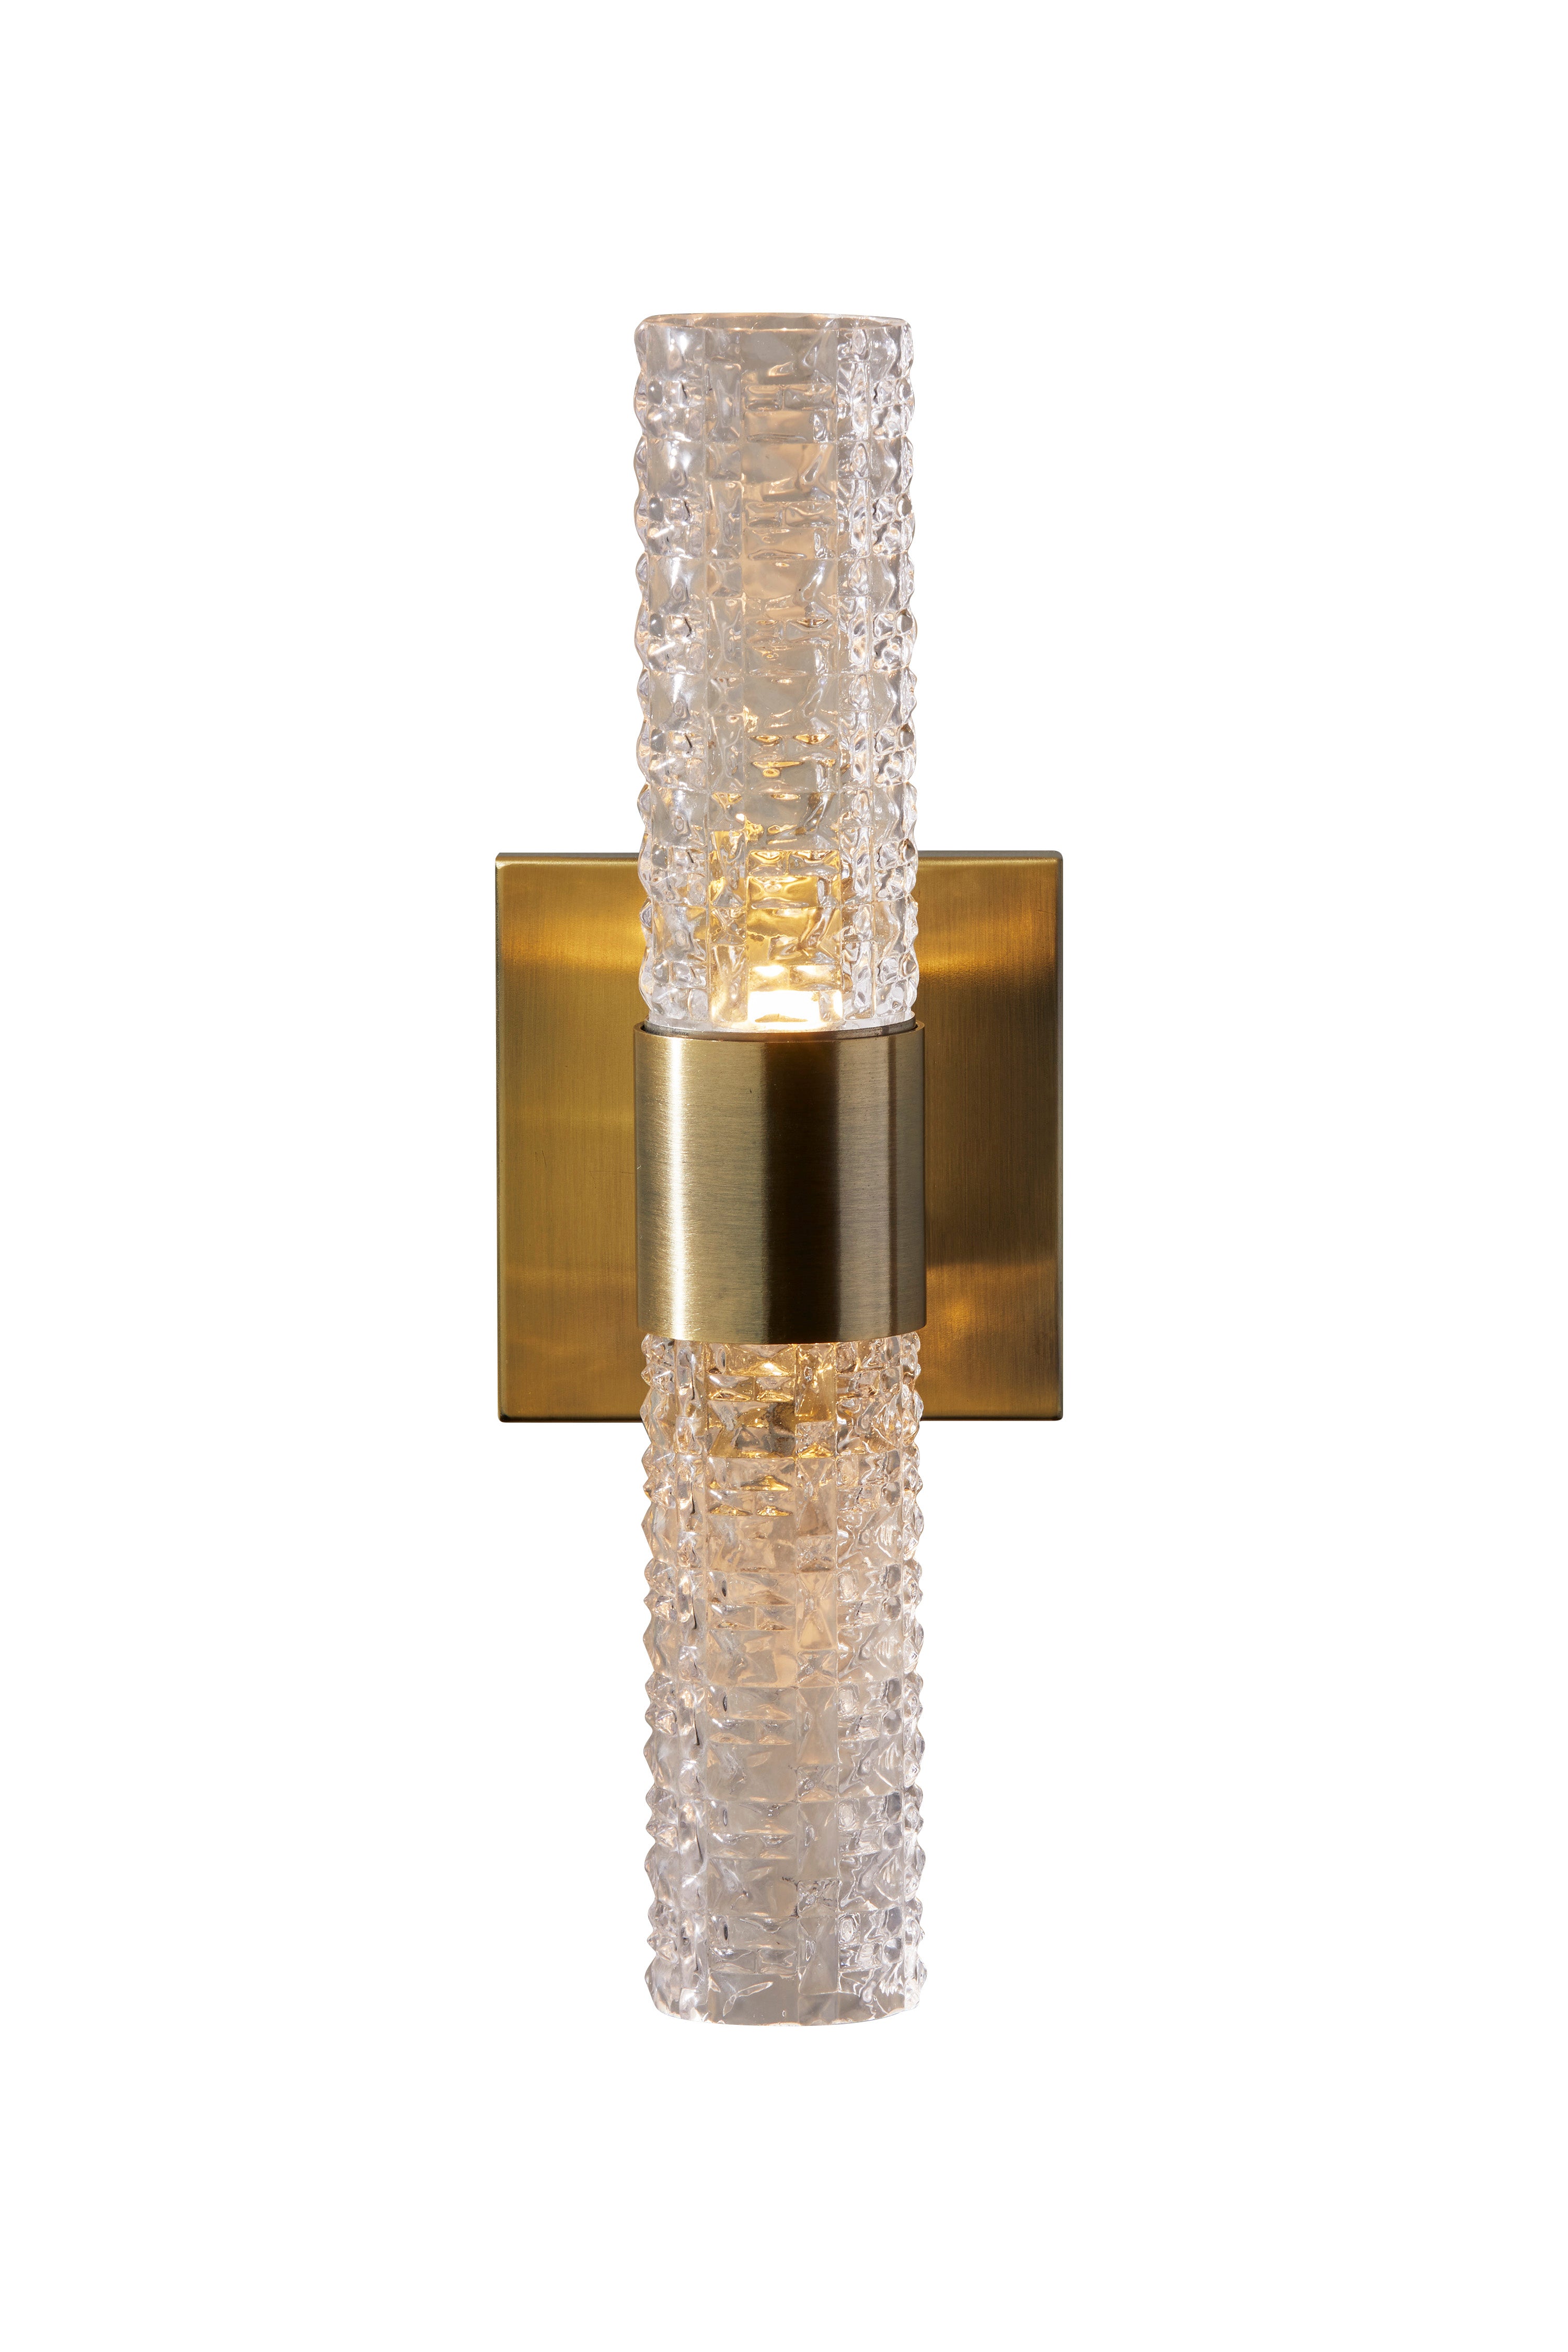 HARRIET Sconce Gold INTEGRATED LED - 3696-21 | ADESSO